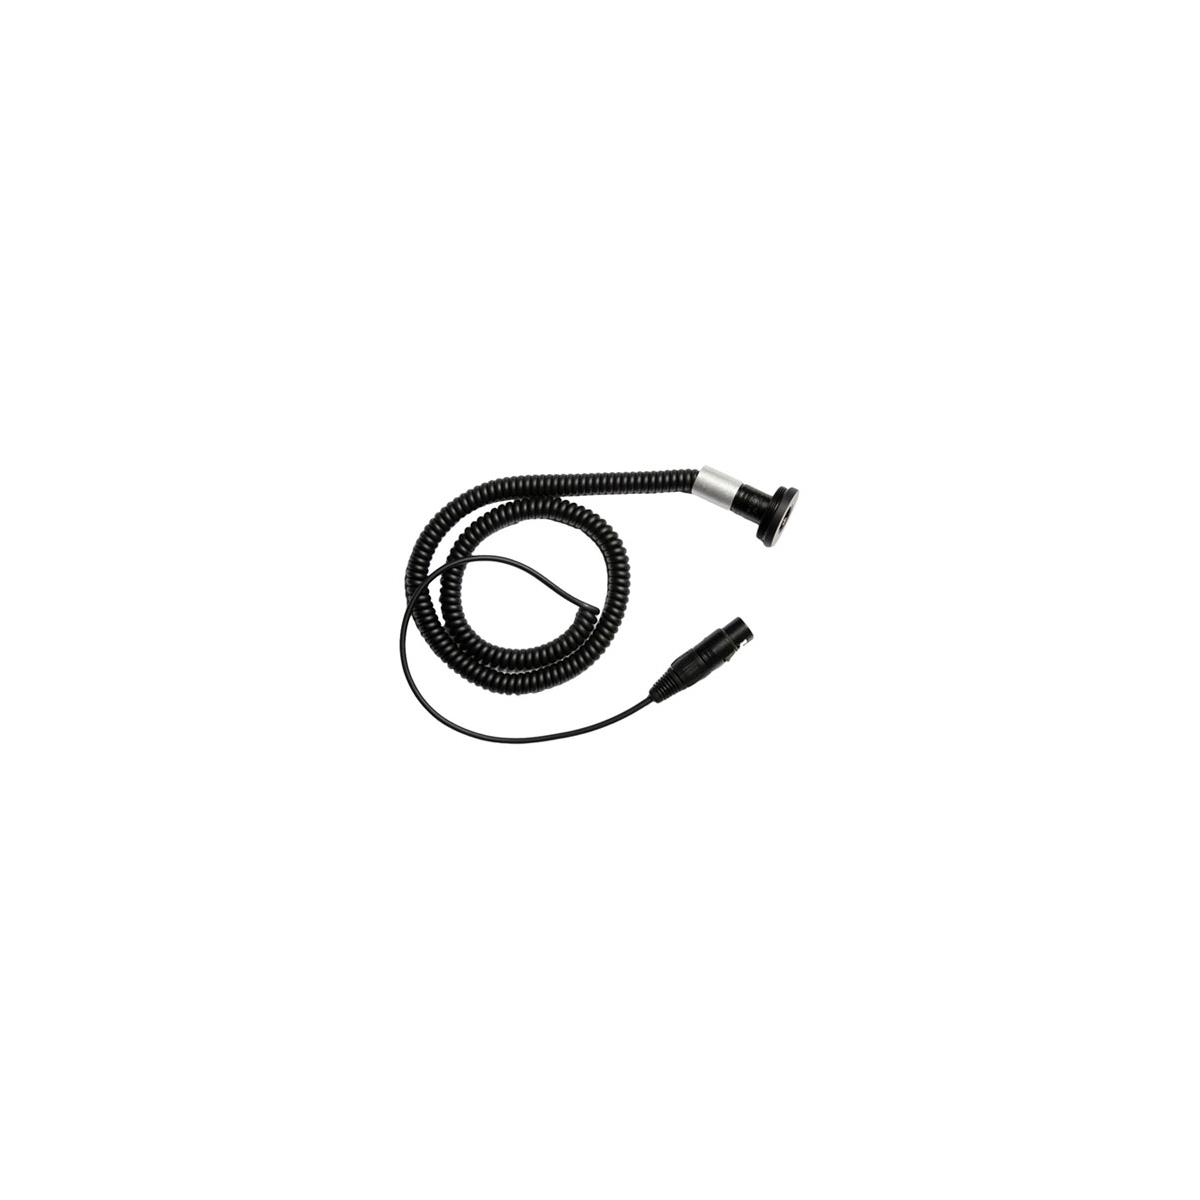 Image of PSC Coil Cable Kit for Large Boom Pole